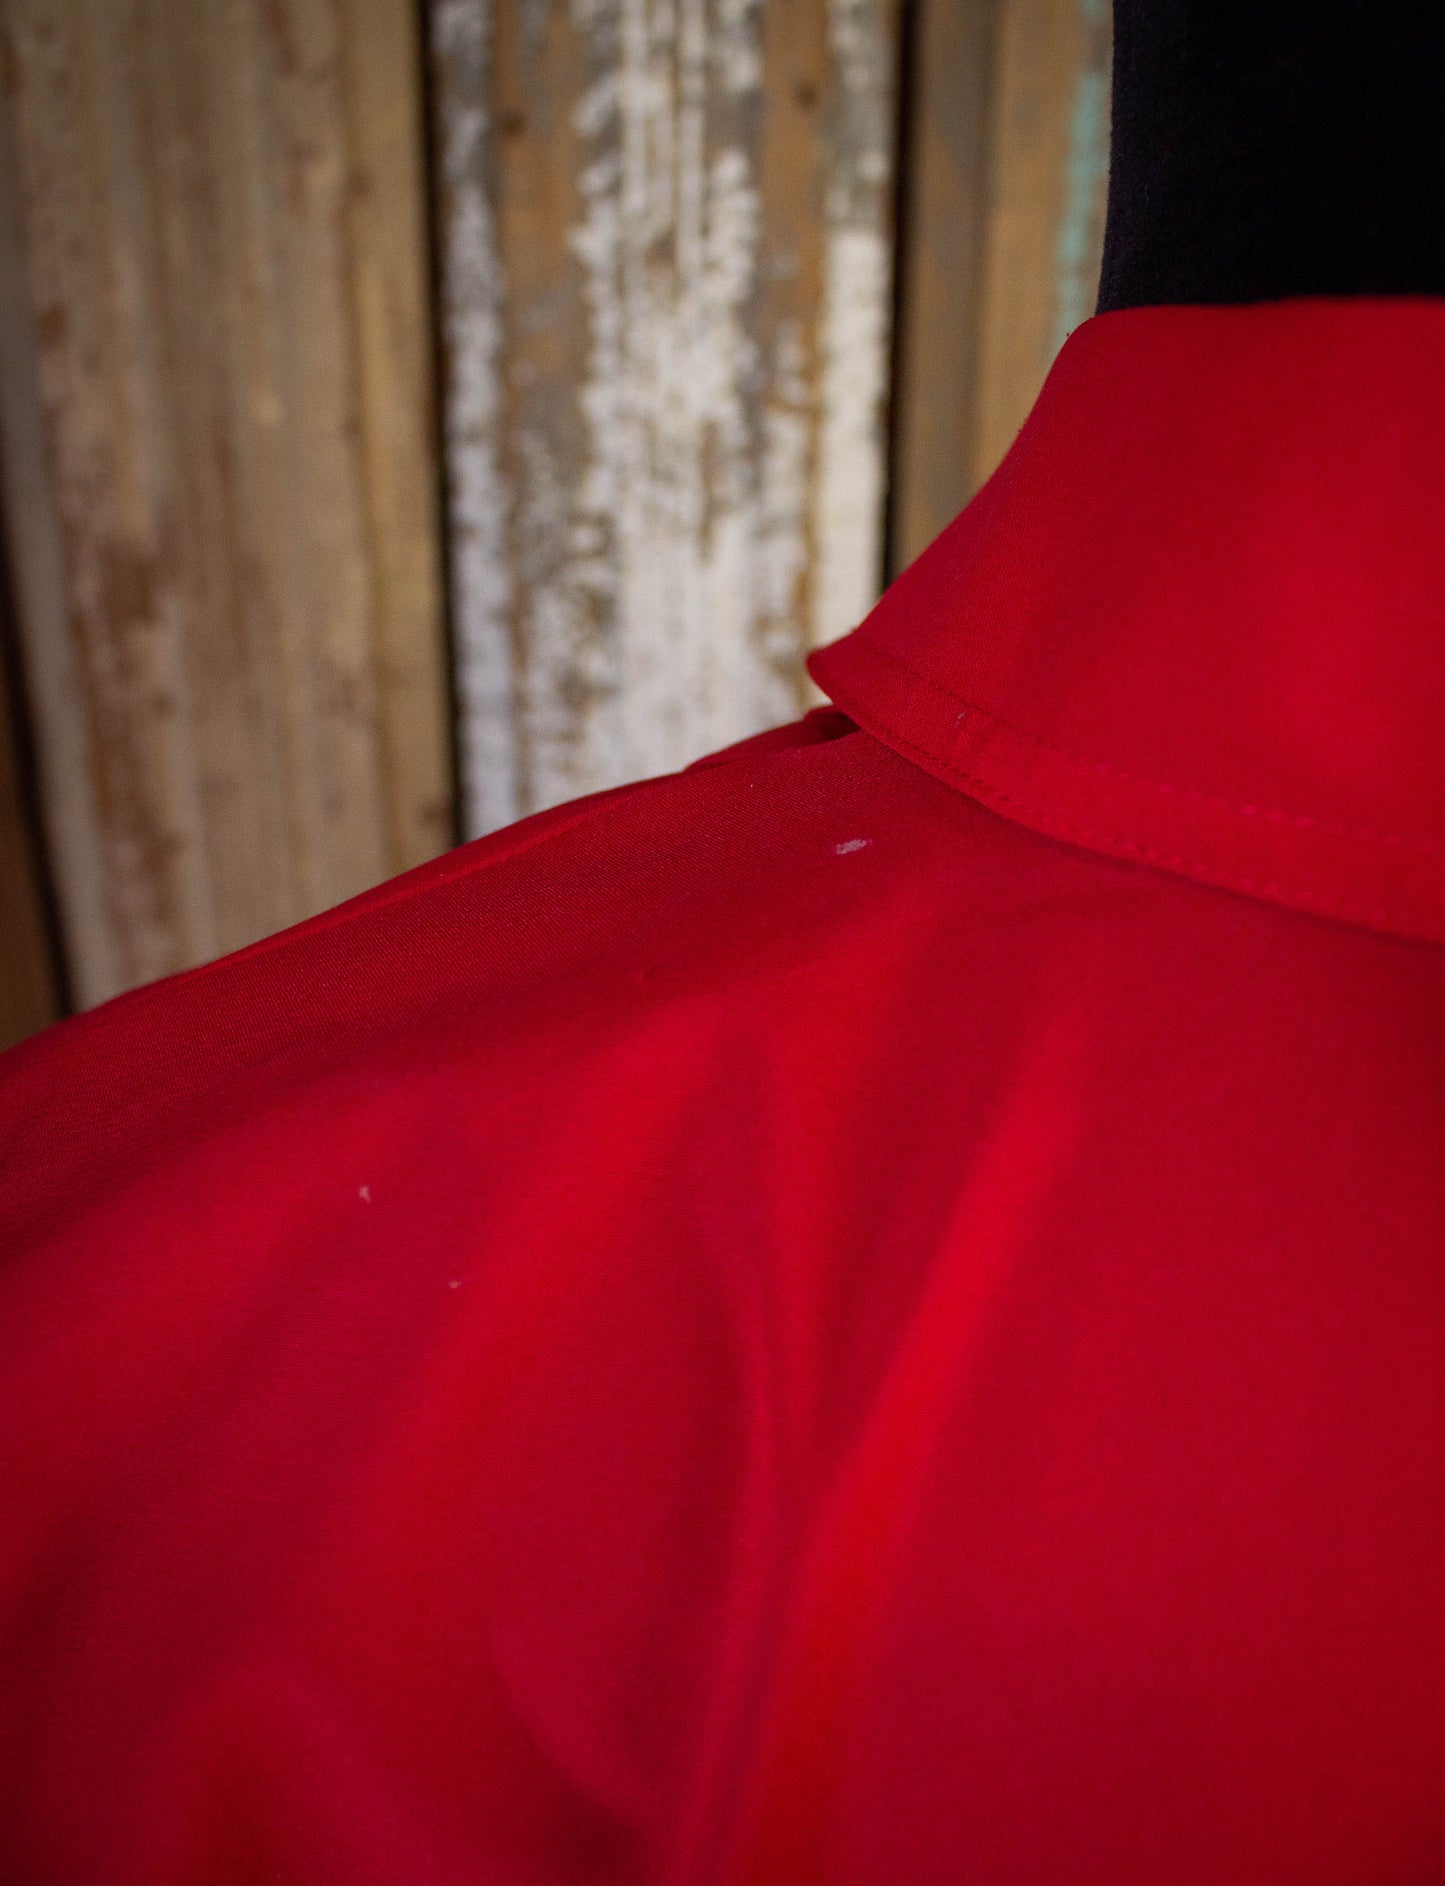 Vintage Josephine Red Button Down Deadstock Blouse 1990s M